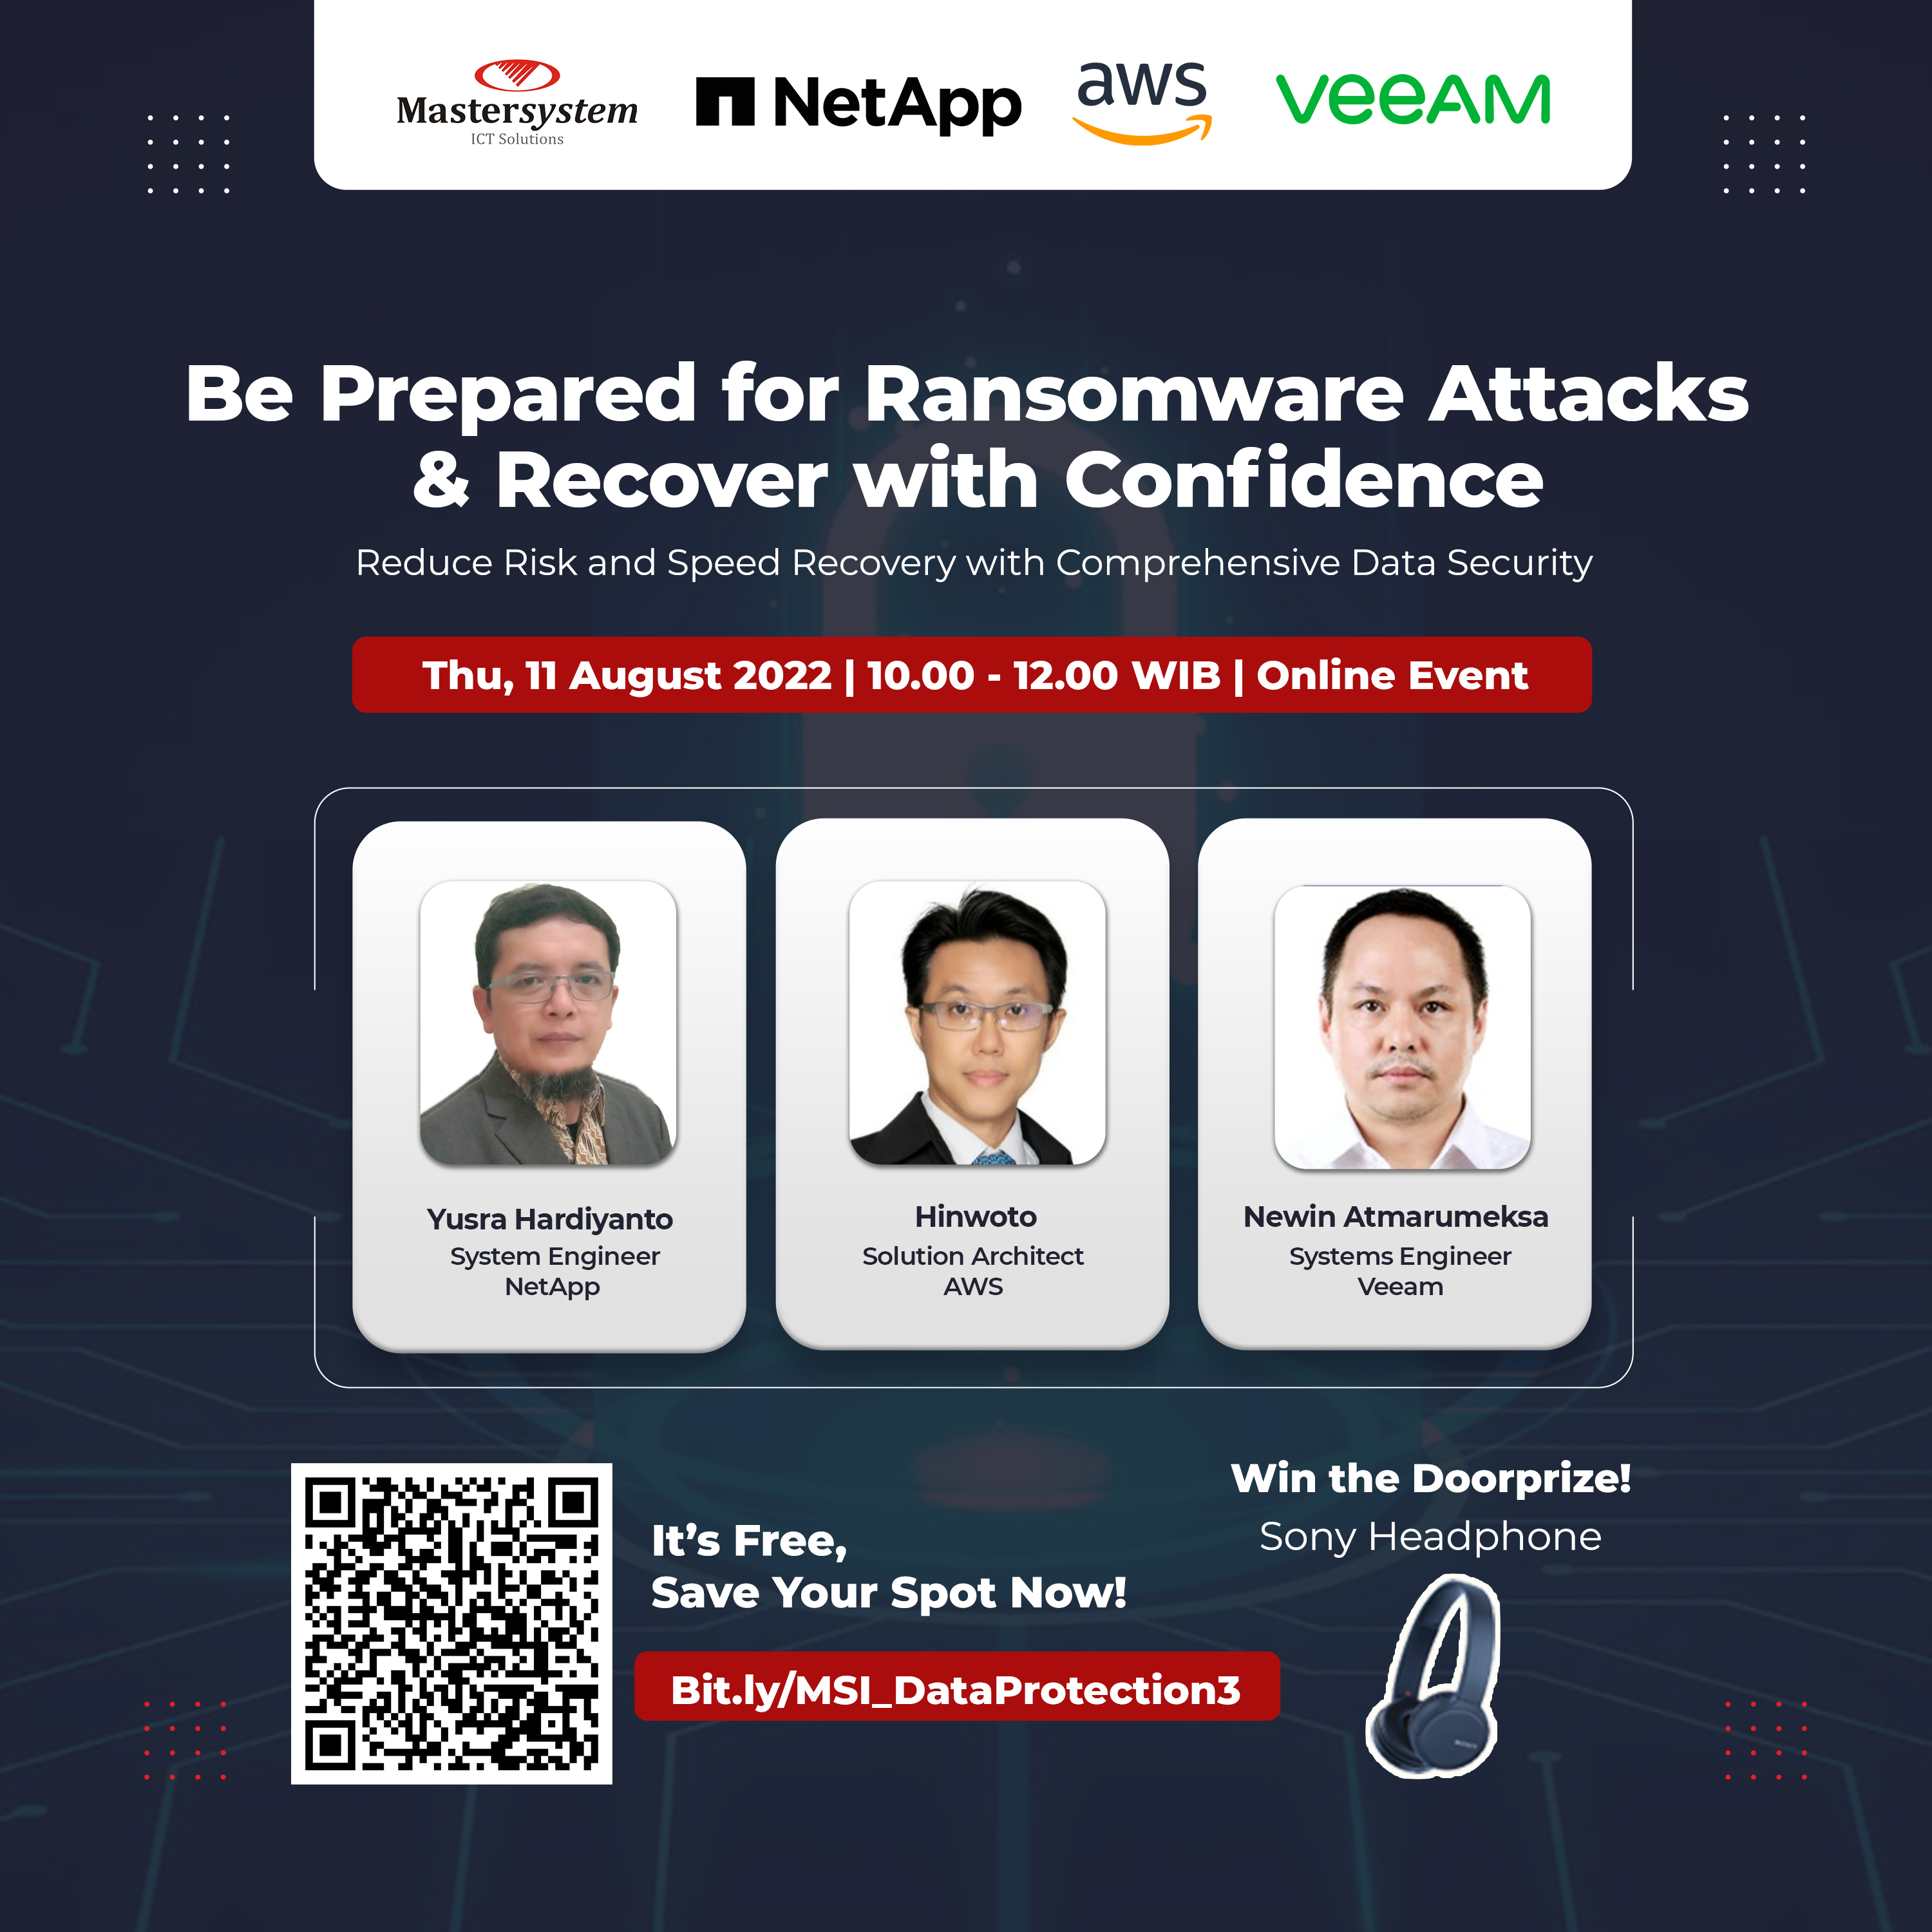 Be Prepared for Ransomware Attacks and Recover with Confidence